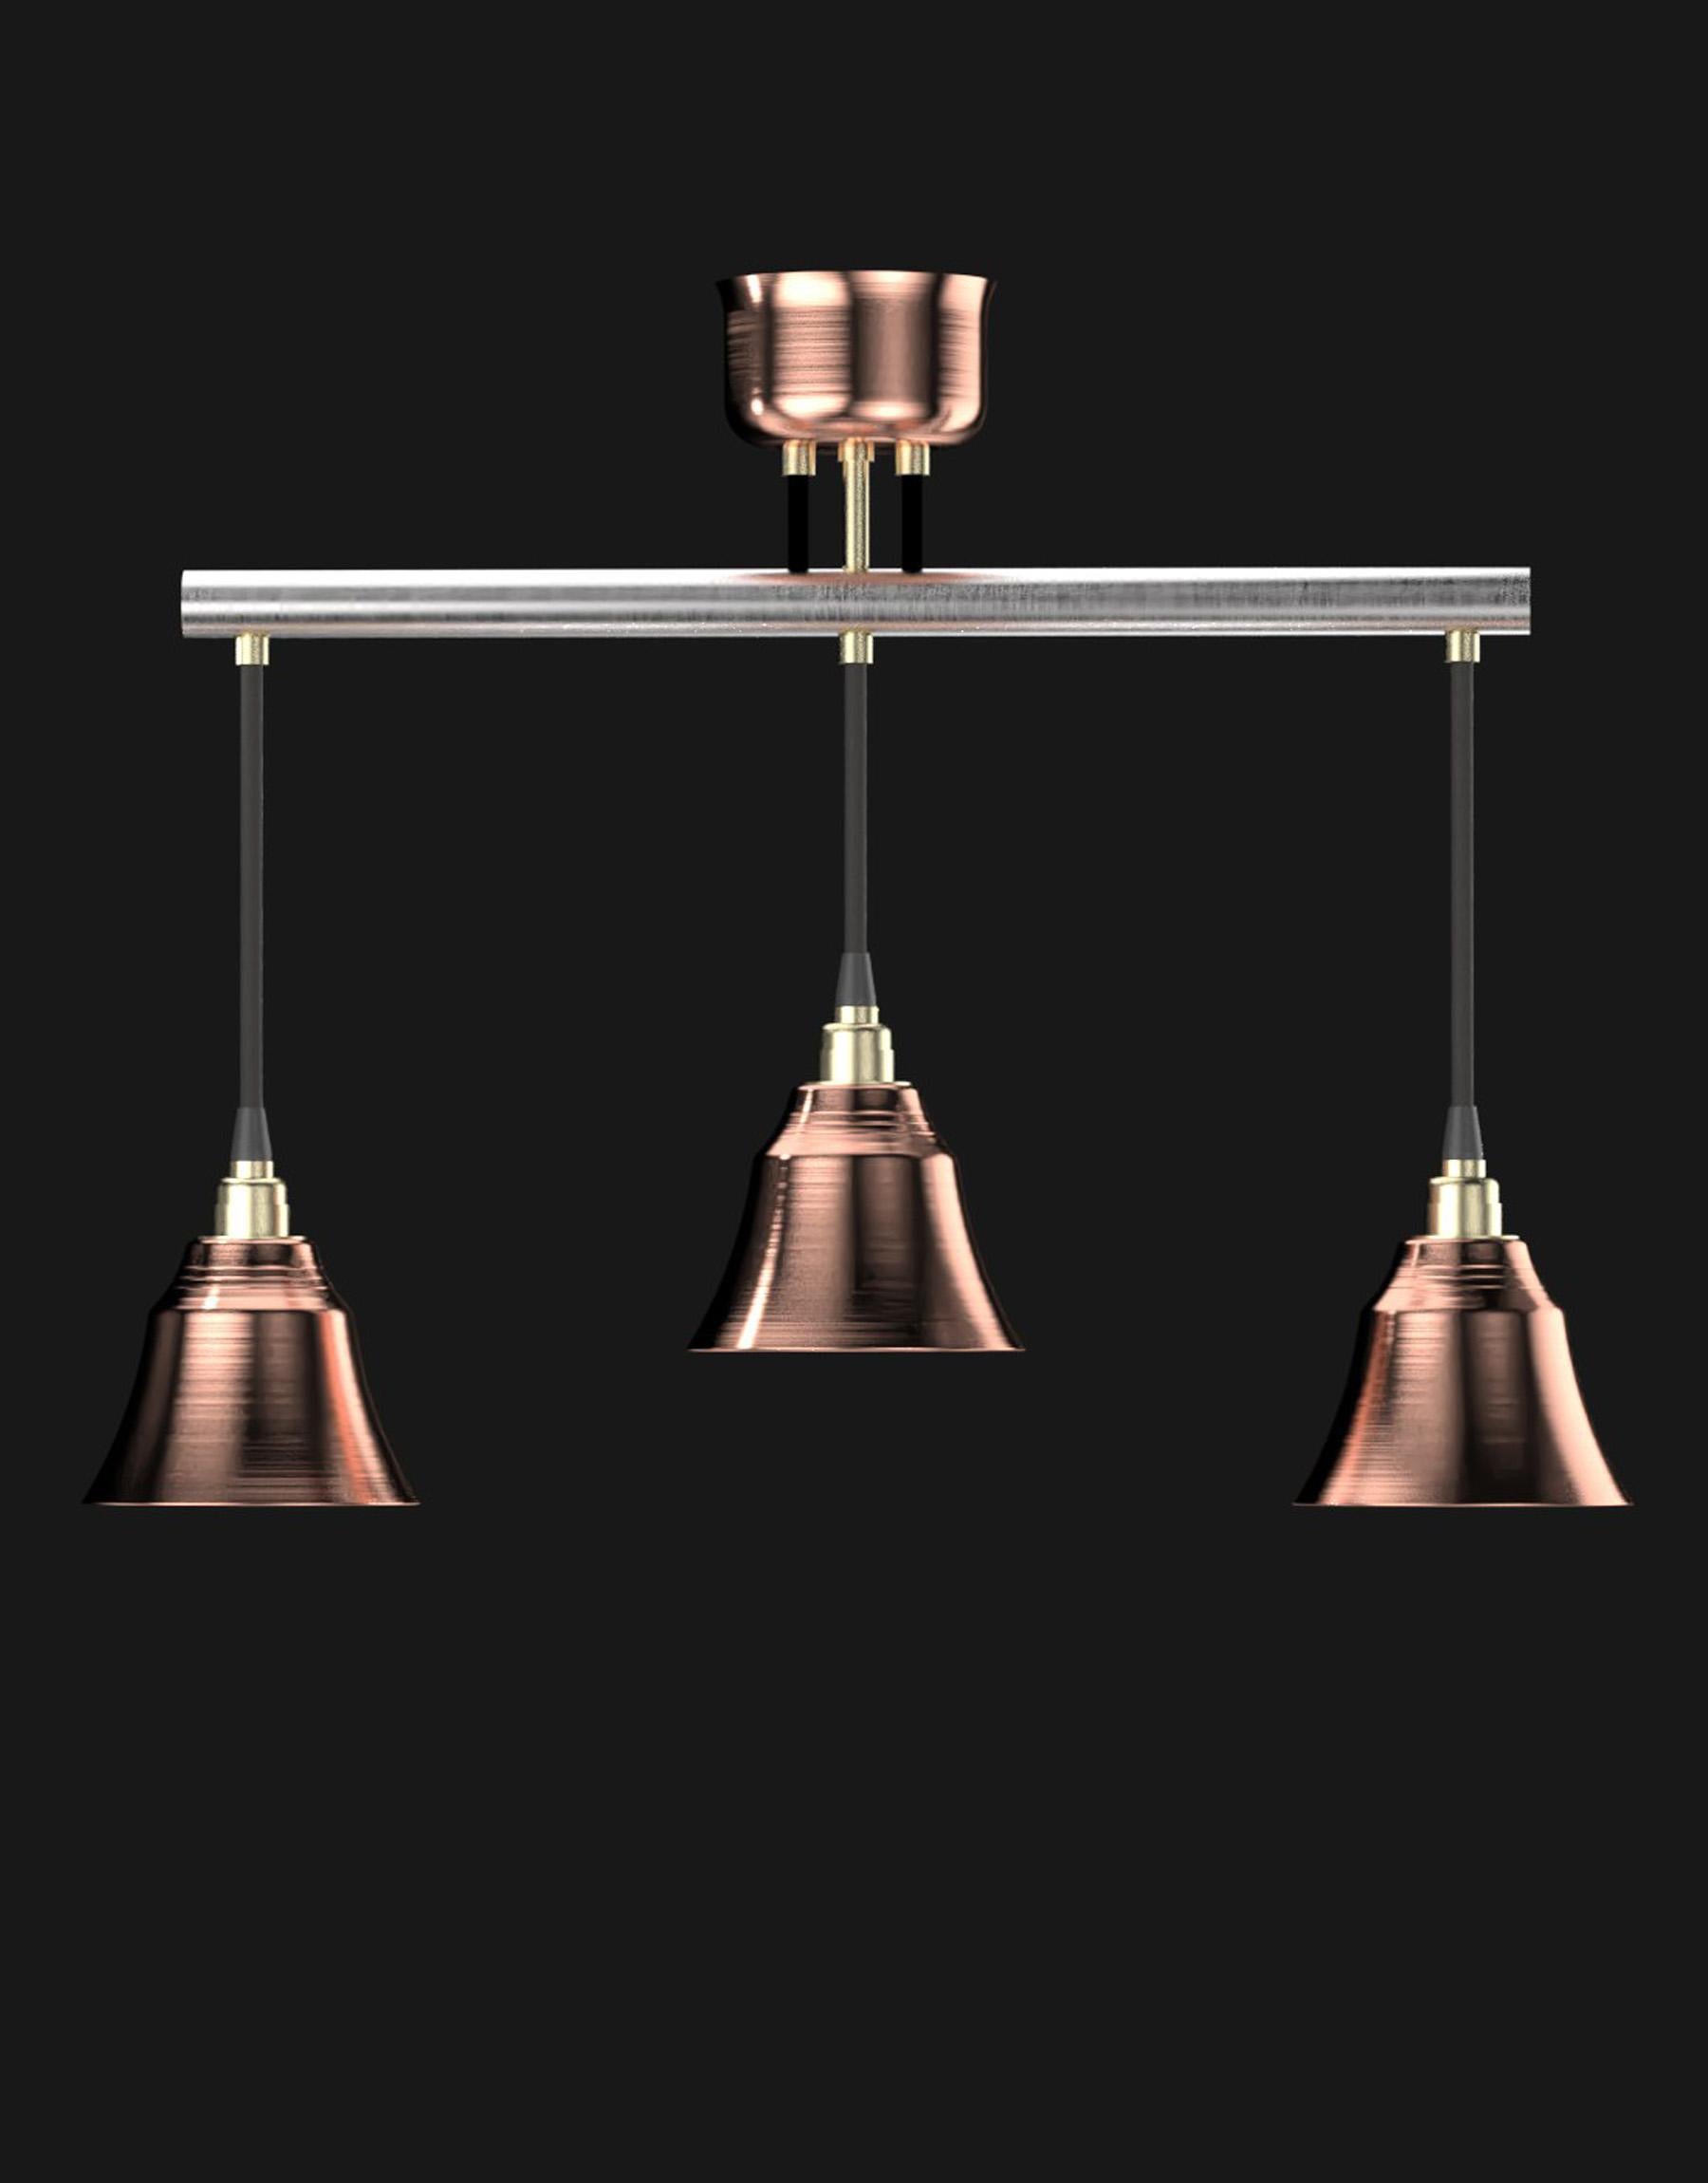 Hand-Crafted Edimate Stainless Steel / Copper Spot V2 Ceiling Light, Handmade in France For Sale